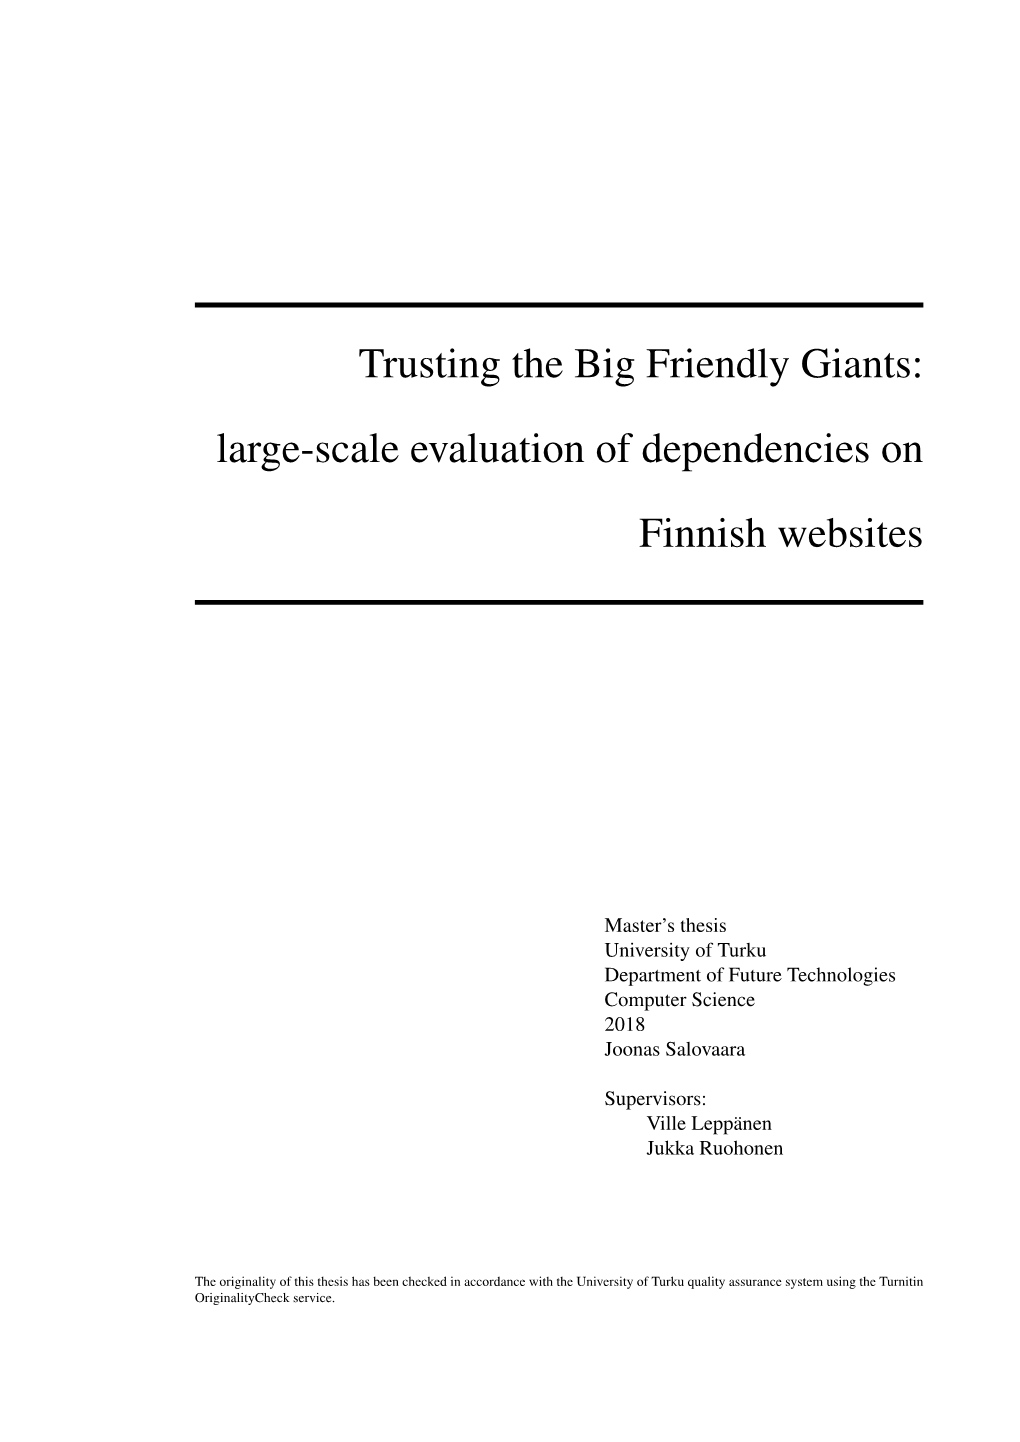 Trusting the Big Friendly Giants: Large-Scale Evaluation of Dependencies on Finnish Websites